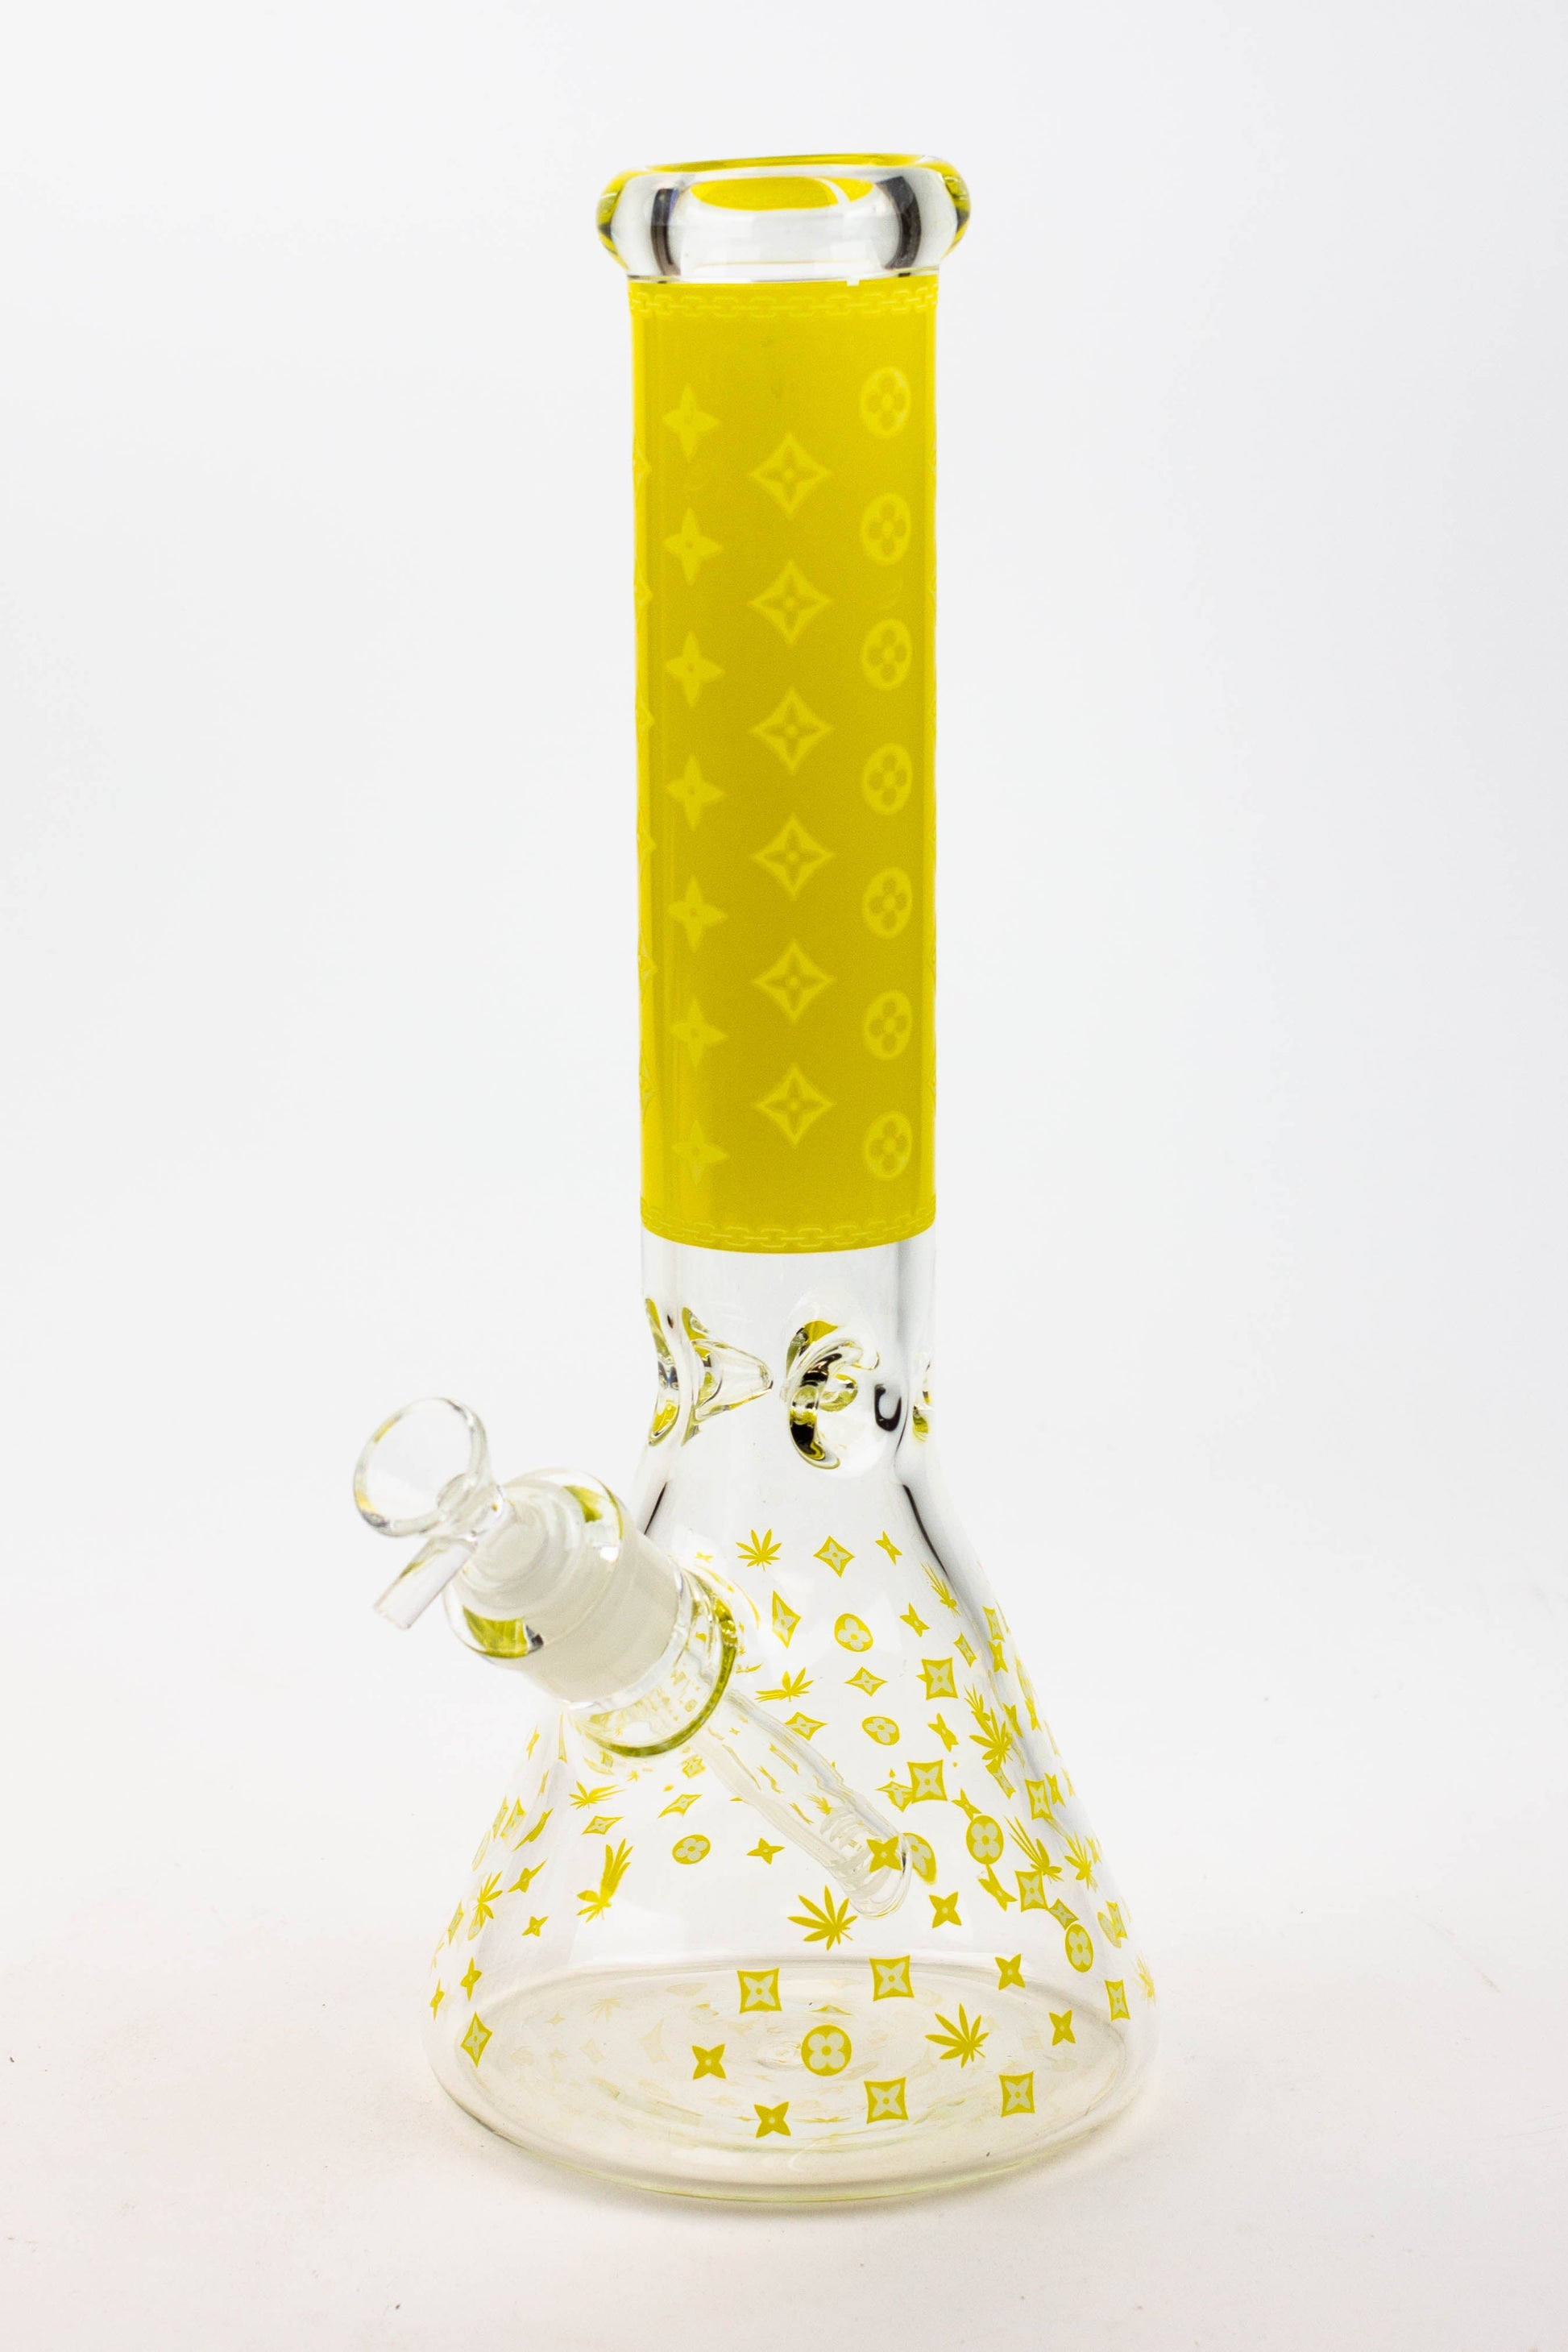 14" Luxury Patten Glow in the dark 7 mm glass bong [A24] Flower Power Packages Yellow 